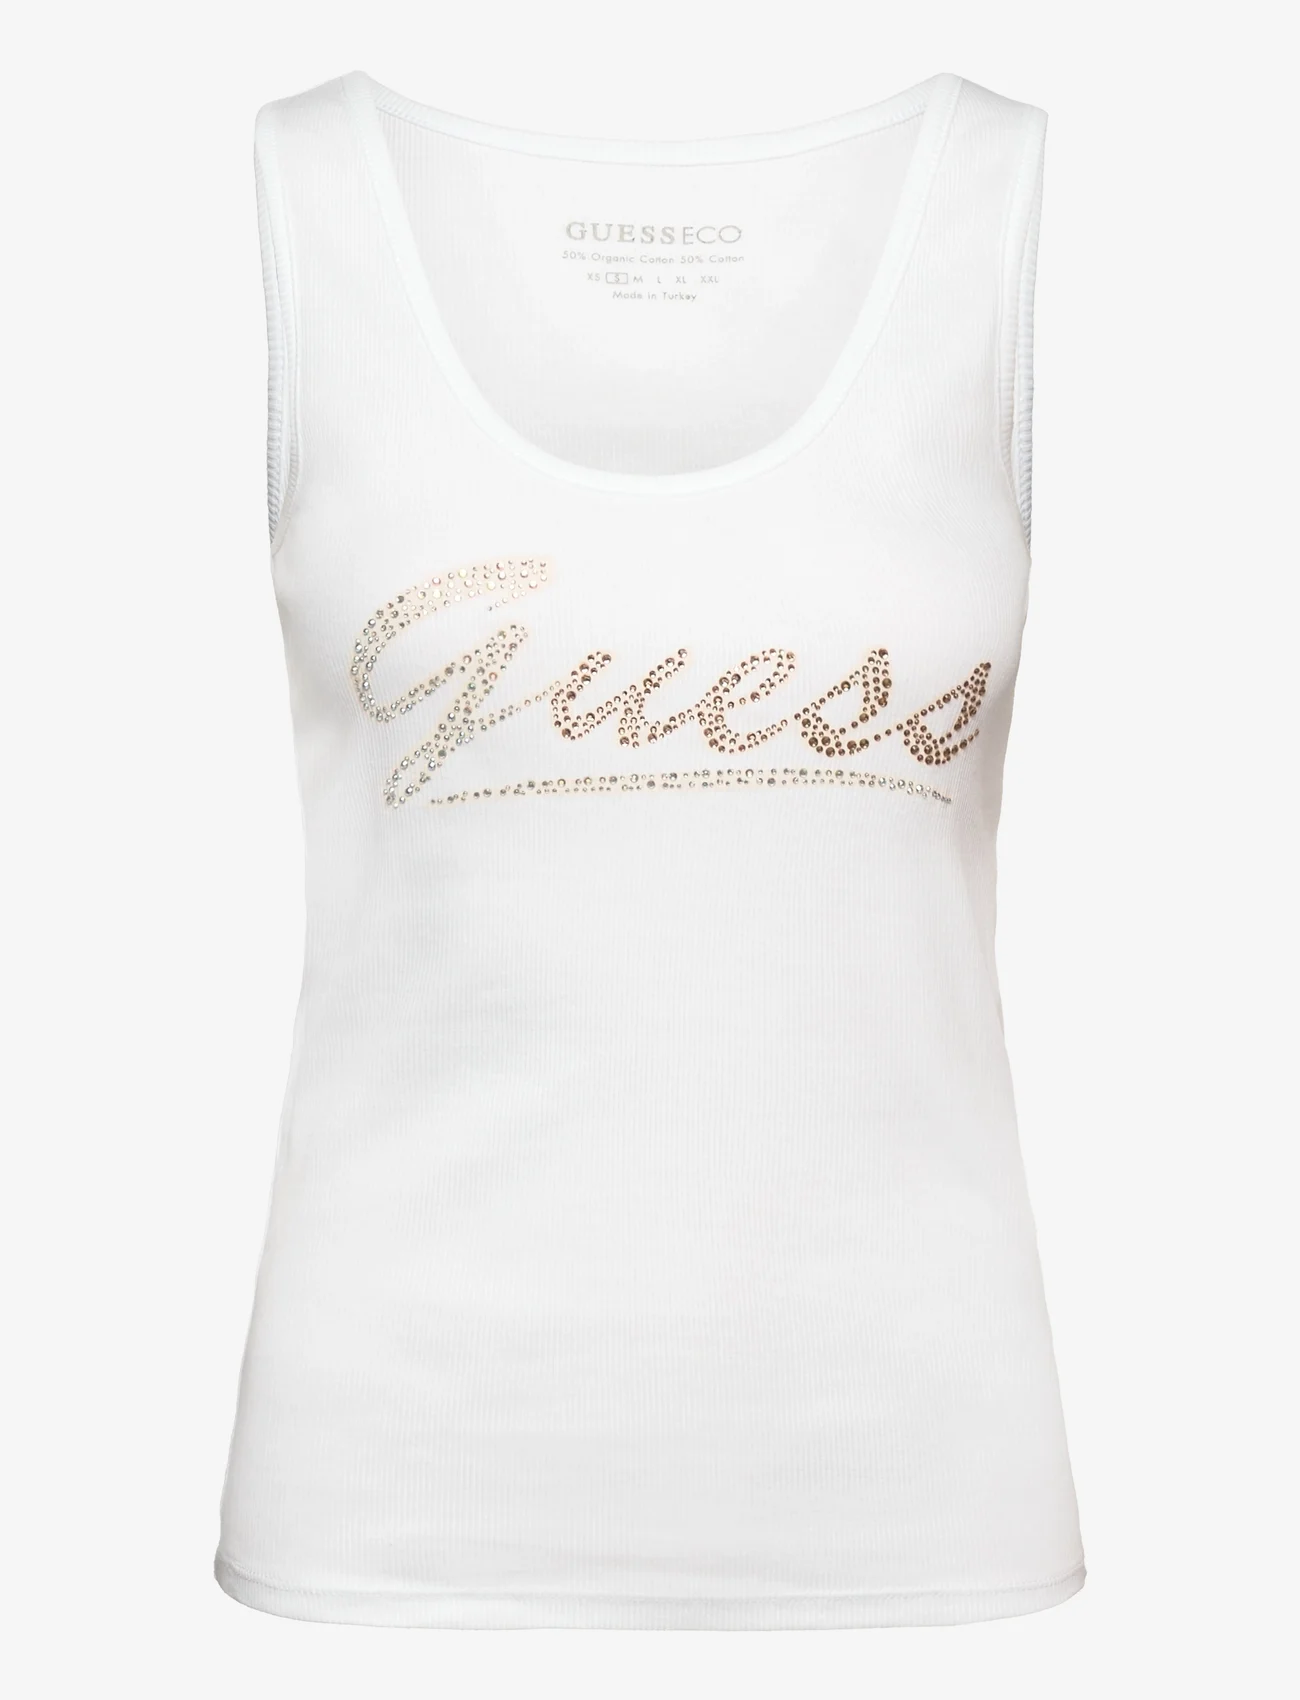 GUESS Jeans - LOGO TANK TOP - ermeløse topper - pure white - 0